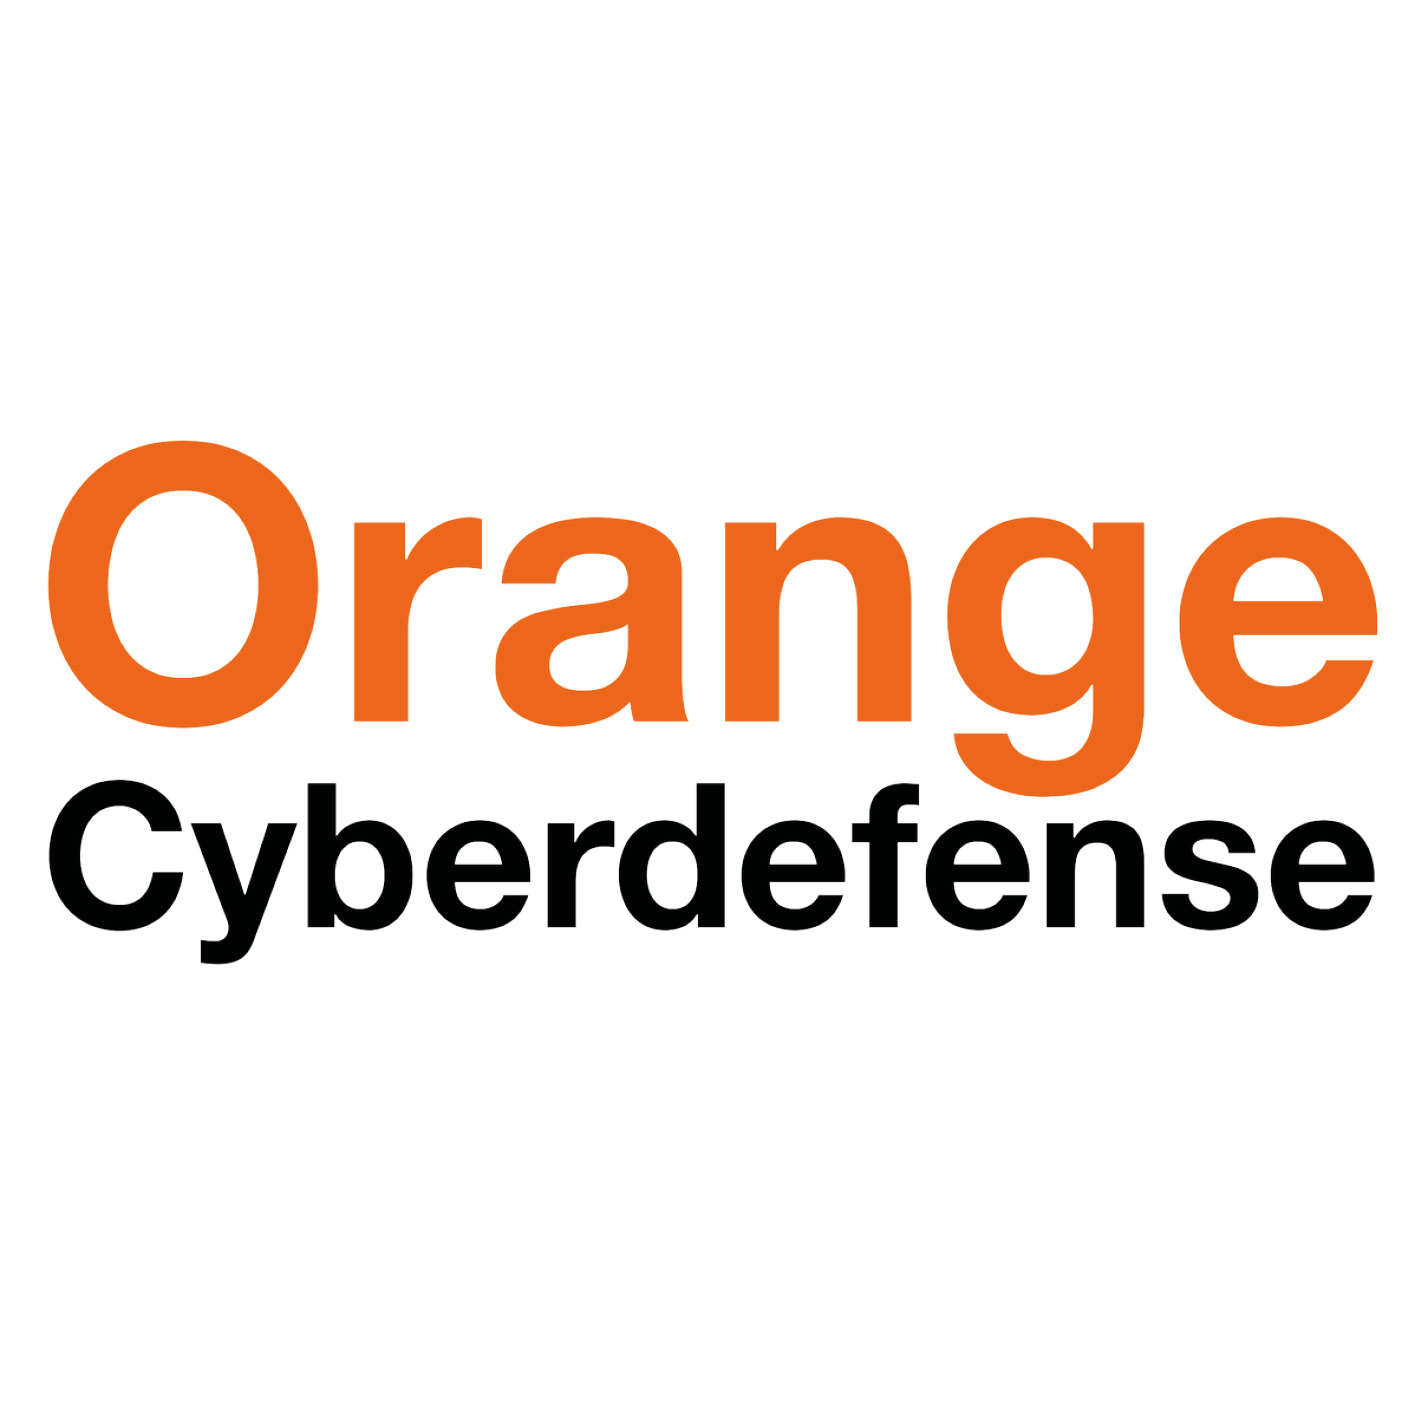 Orange Cyberdefense widens access to professional communications security with its “Mobile Security Intense” offer